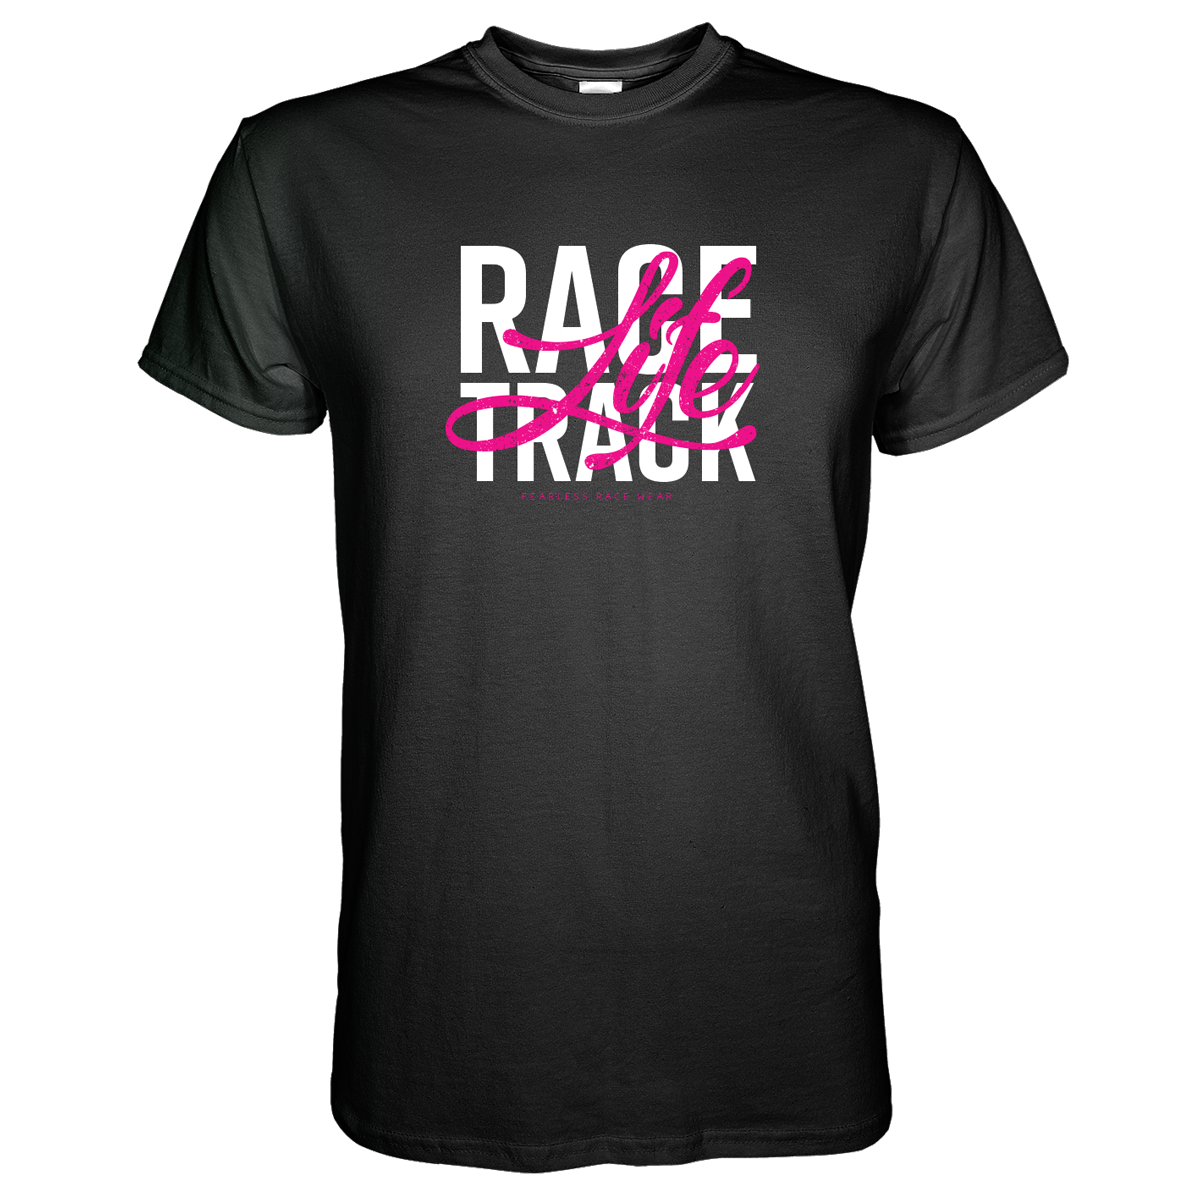 Hoodies | Print | Race Fuchsia Wear Racetrack Fearless + Life or T-Shirts Red